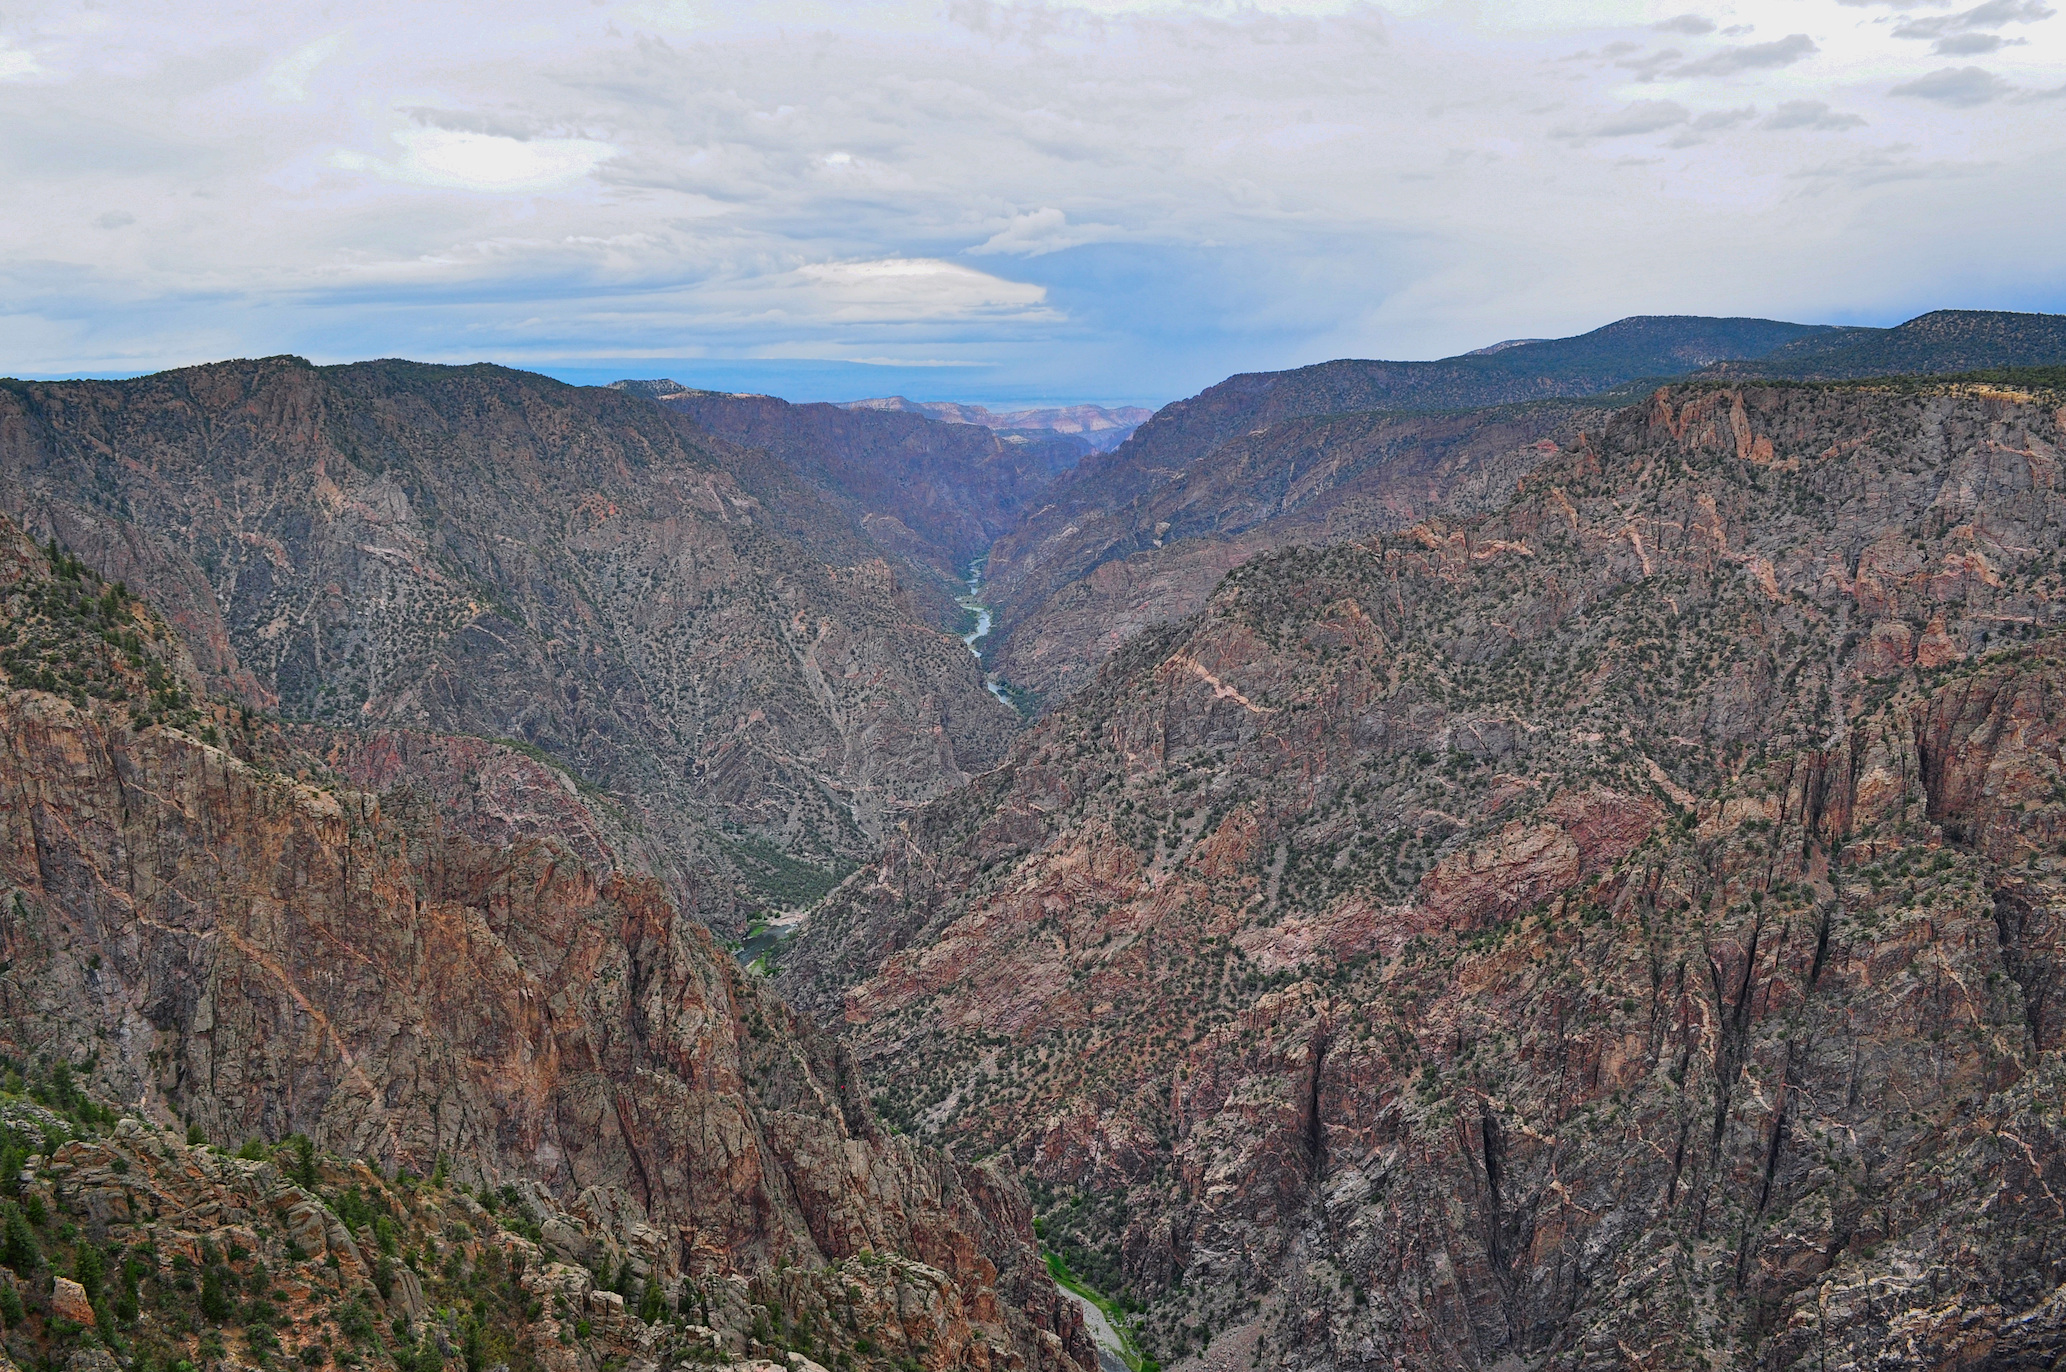 A wide and narrow gorge known as black canyon national park